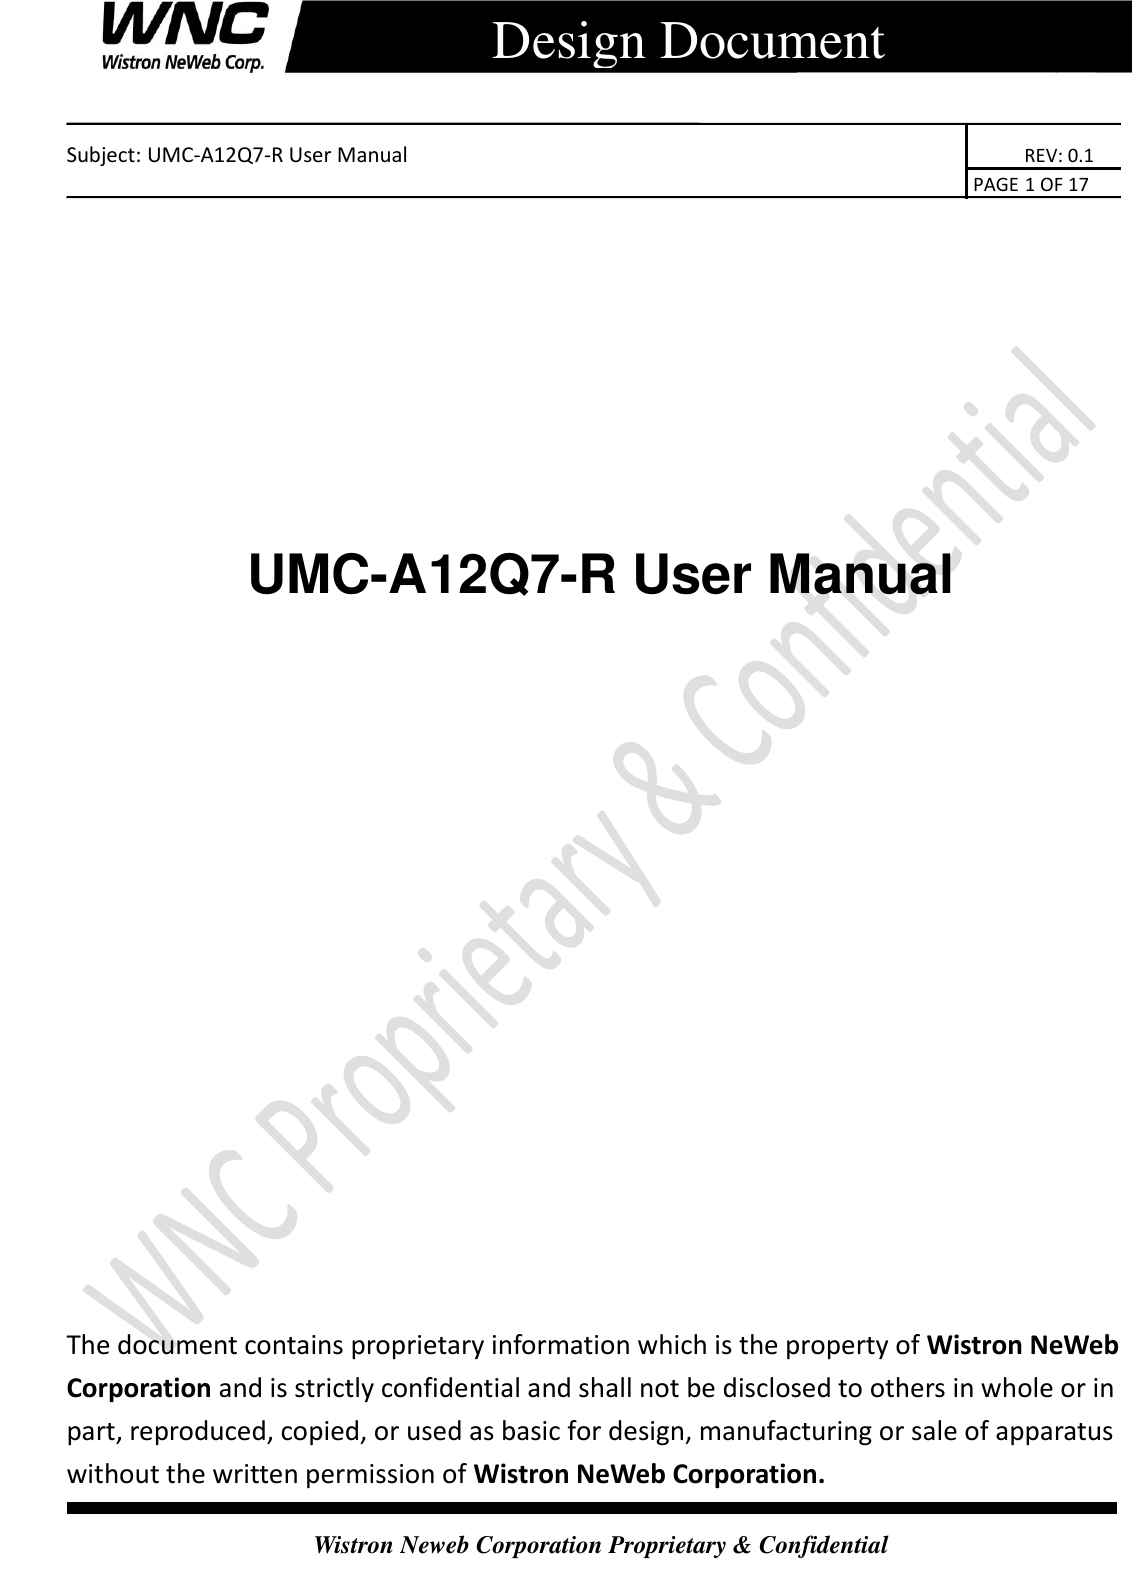    Subject: UMC-A12Q7-R User Manual                                                                      REV: 0.1                                                                                        PAGE 1 OF 17  Wistron Neweb Corporation Proprietary &amp; Confidential      Design Document          UMC-A12Q7-R User Manual                    The document contains proprietary information which is the property of Wistron NeWeb Corporation and is strictly confidential and shall not be disclosed to others in whole or in part, reproduced, copied, or used as basic for design, manufacturing or sale of apparatus without the written permission of Wistron NeWeb Corporation. 